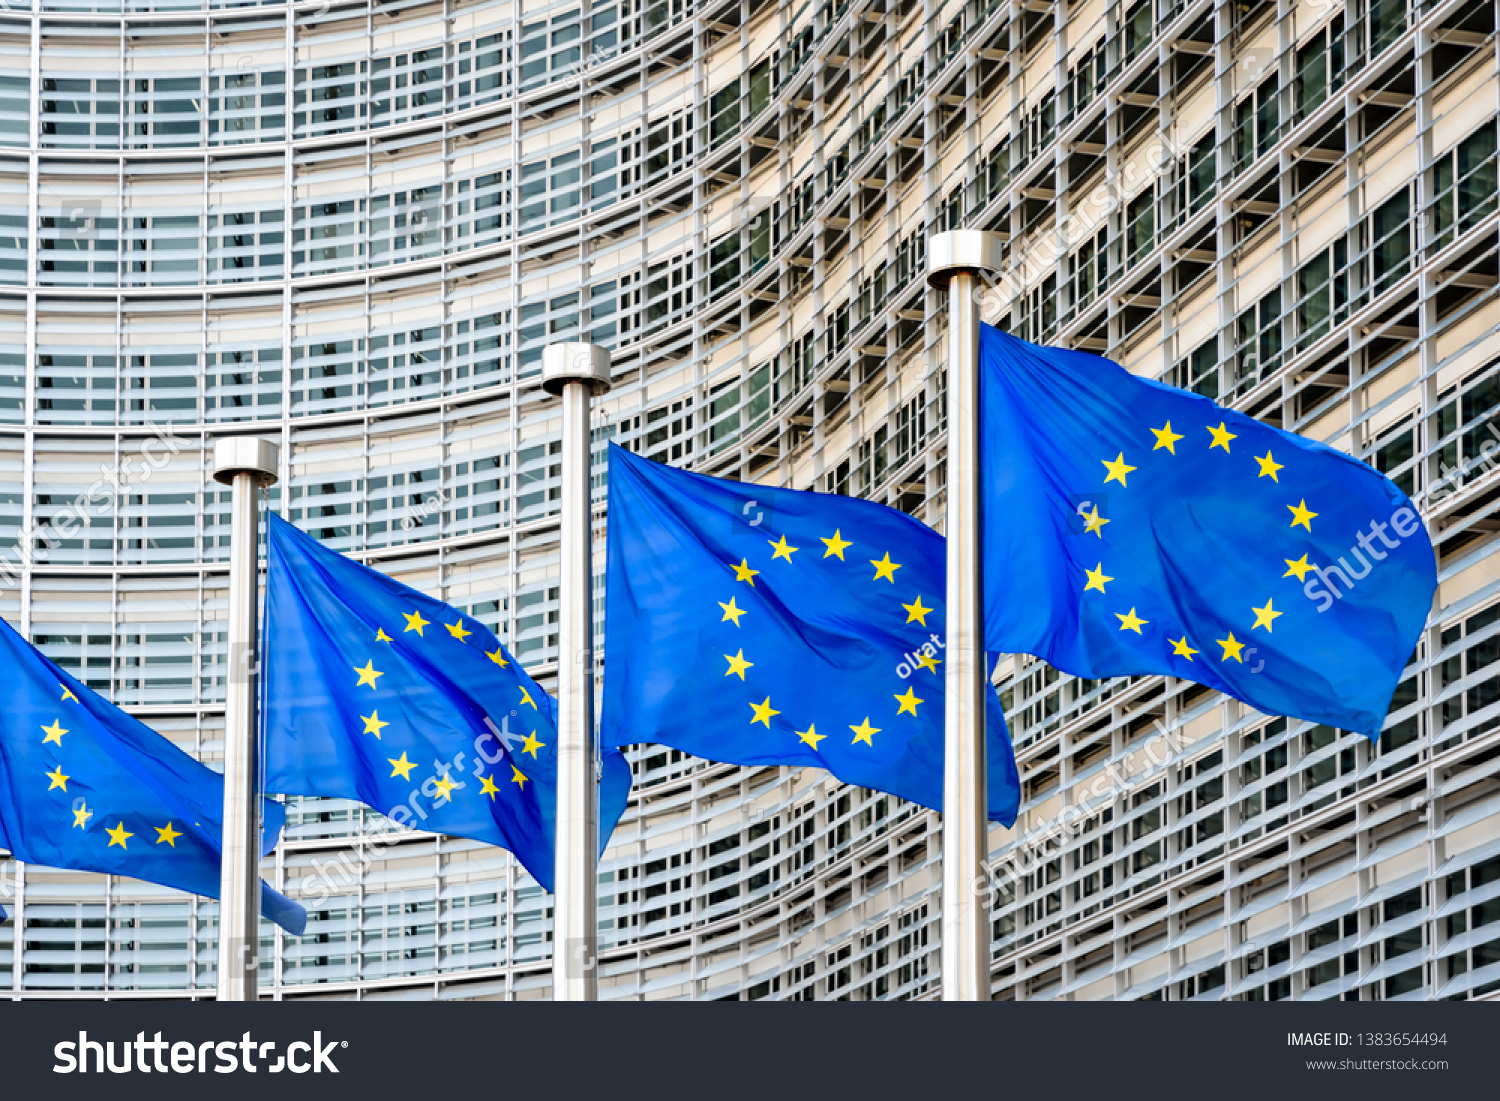 A row of flags of the European Union flying in the wind in front of the Berlaymont building, seat of the European Commission in Brussels, Belgium. #1383654494